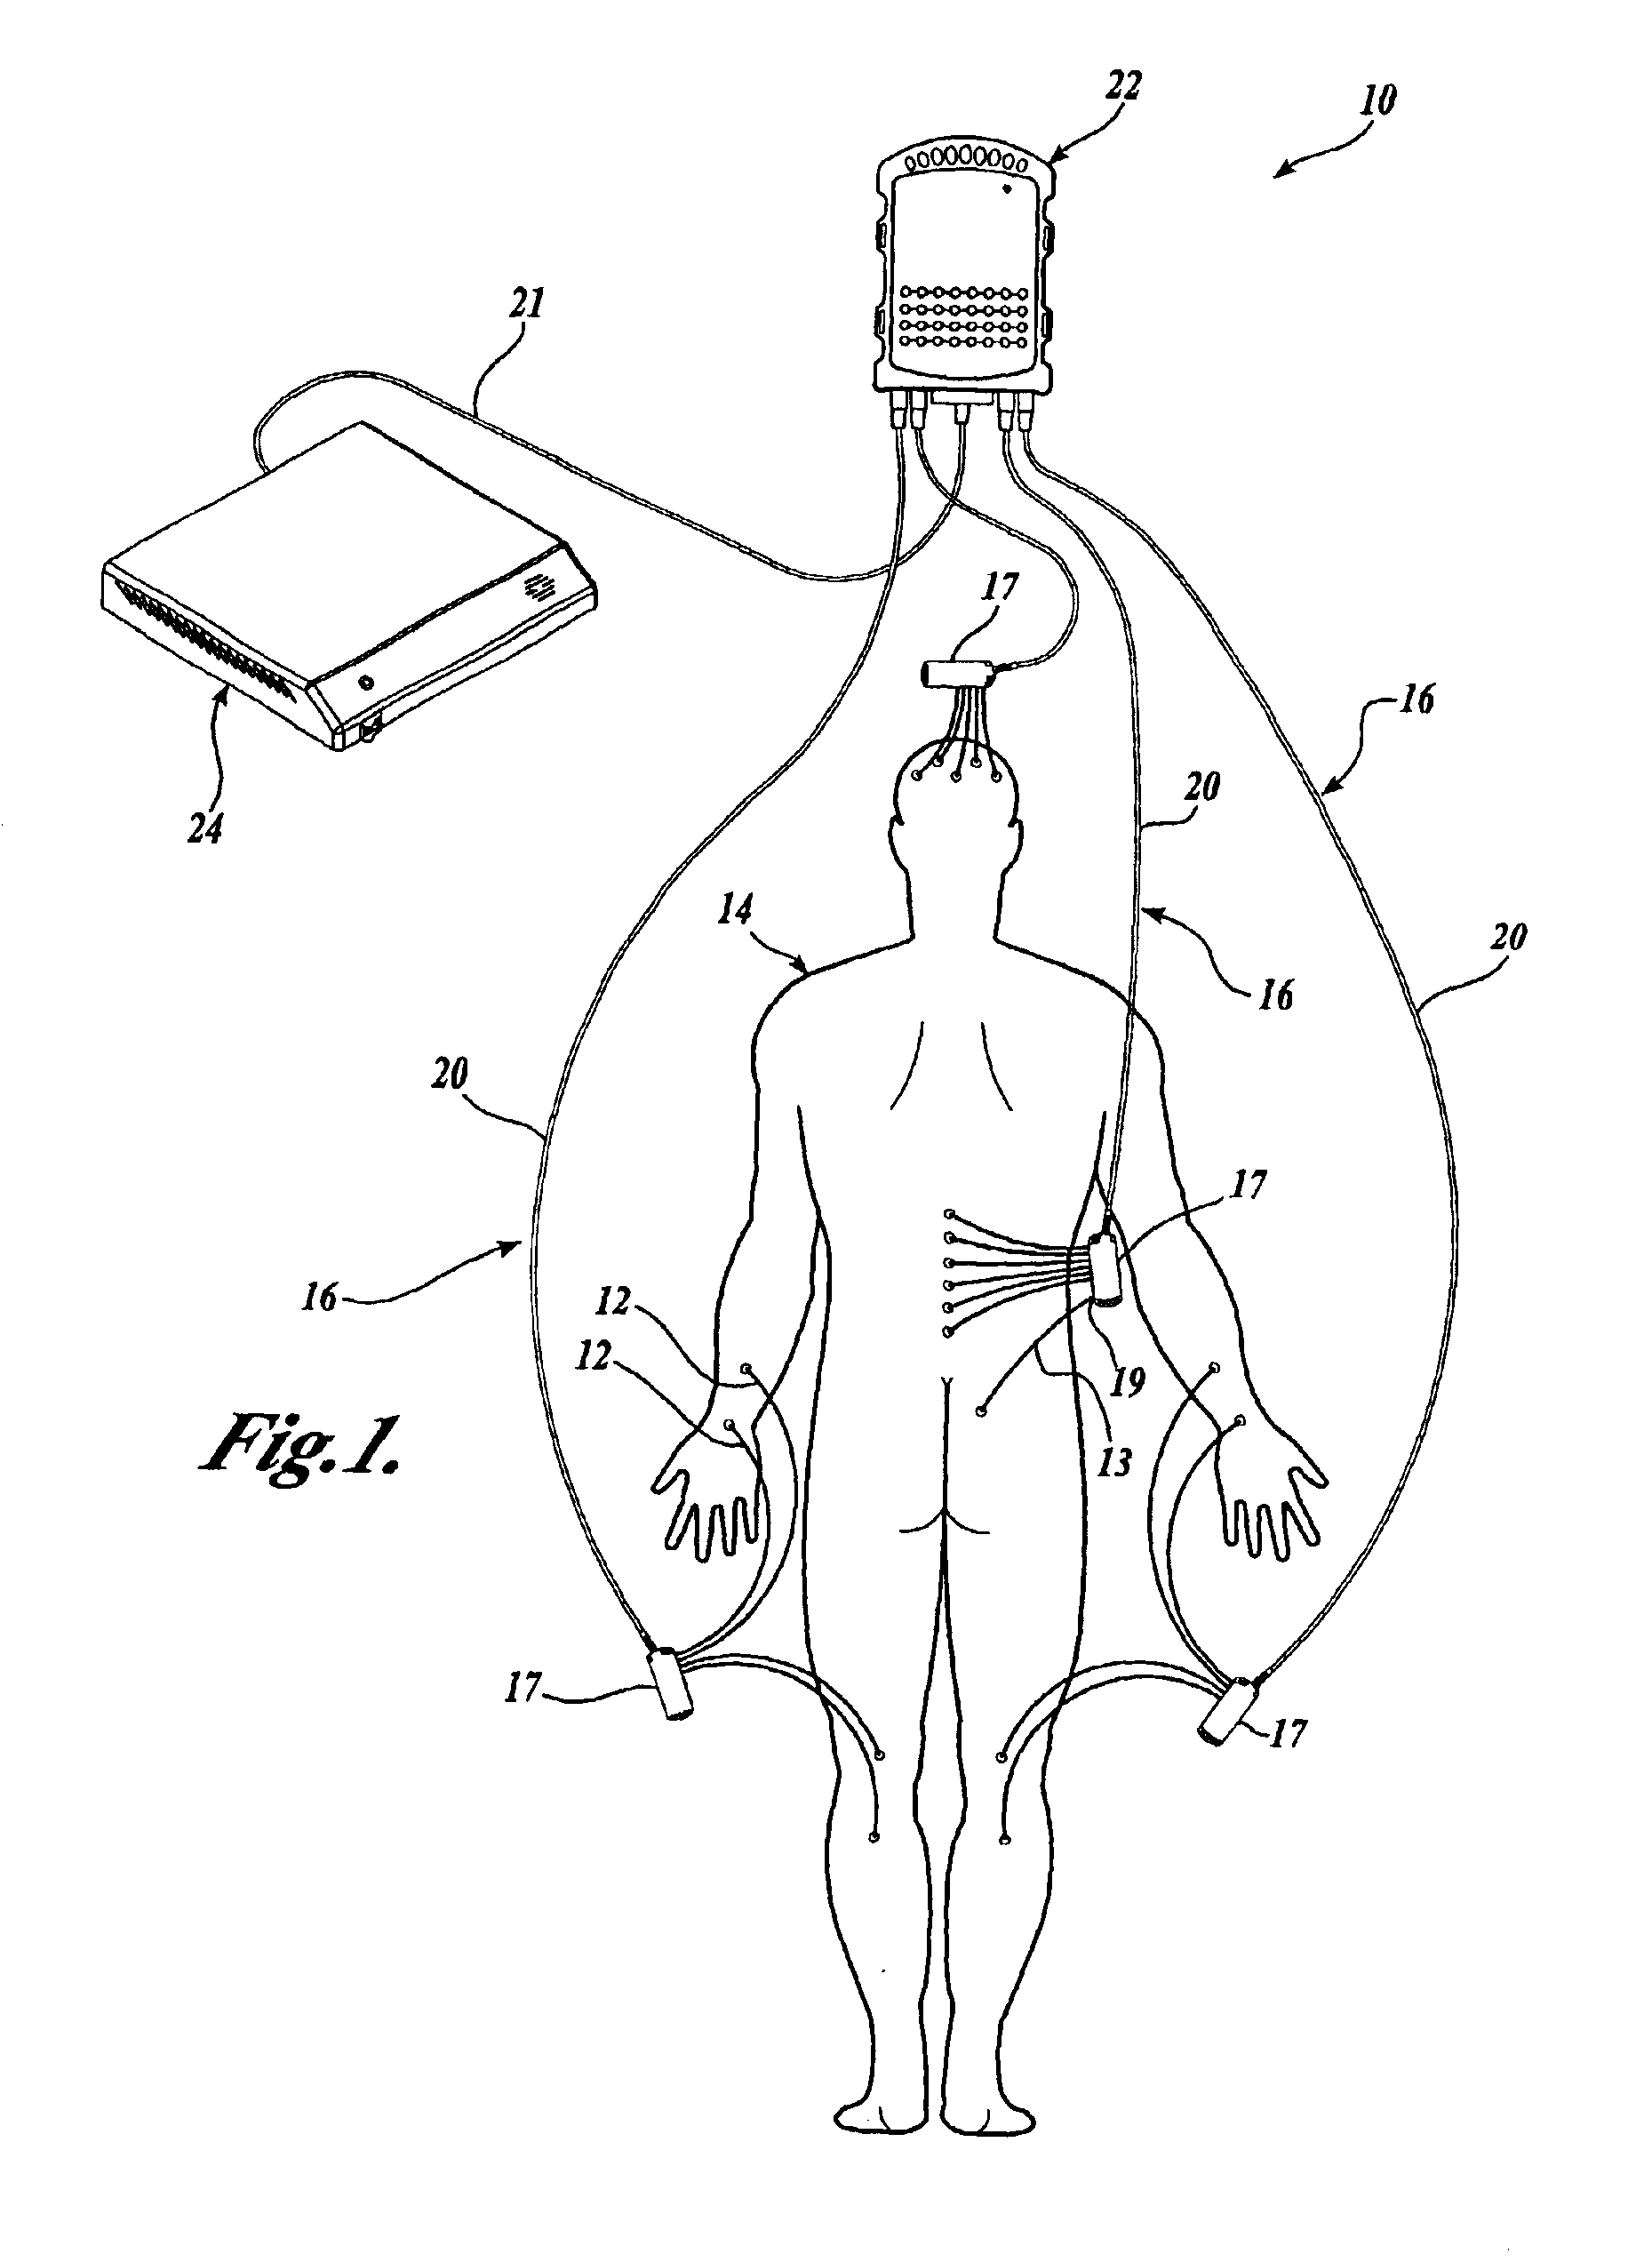 System and device for reducing signal interference in patient monitoring systems